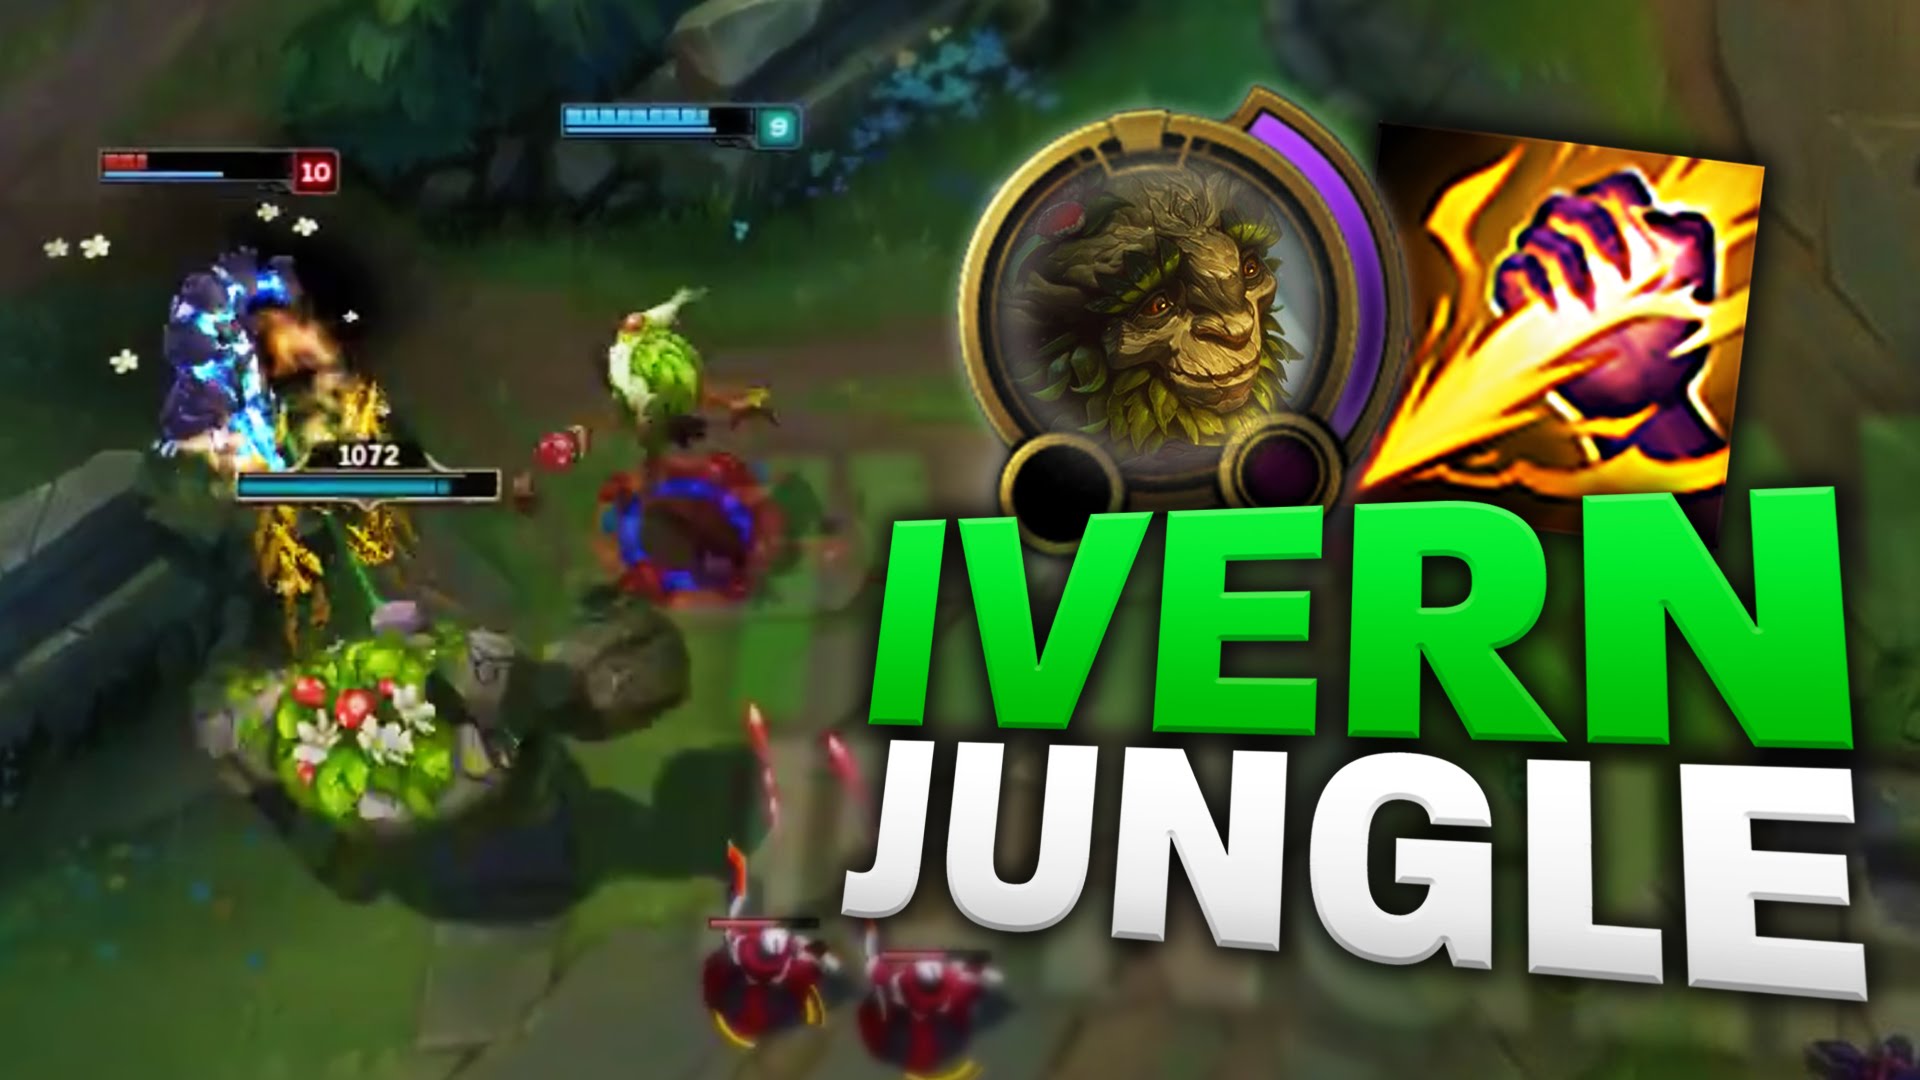 IVERN JUNGLE GAMEPLAY [League of Legends/LoL]